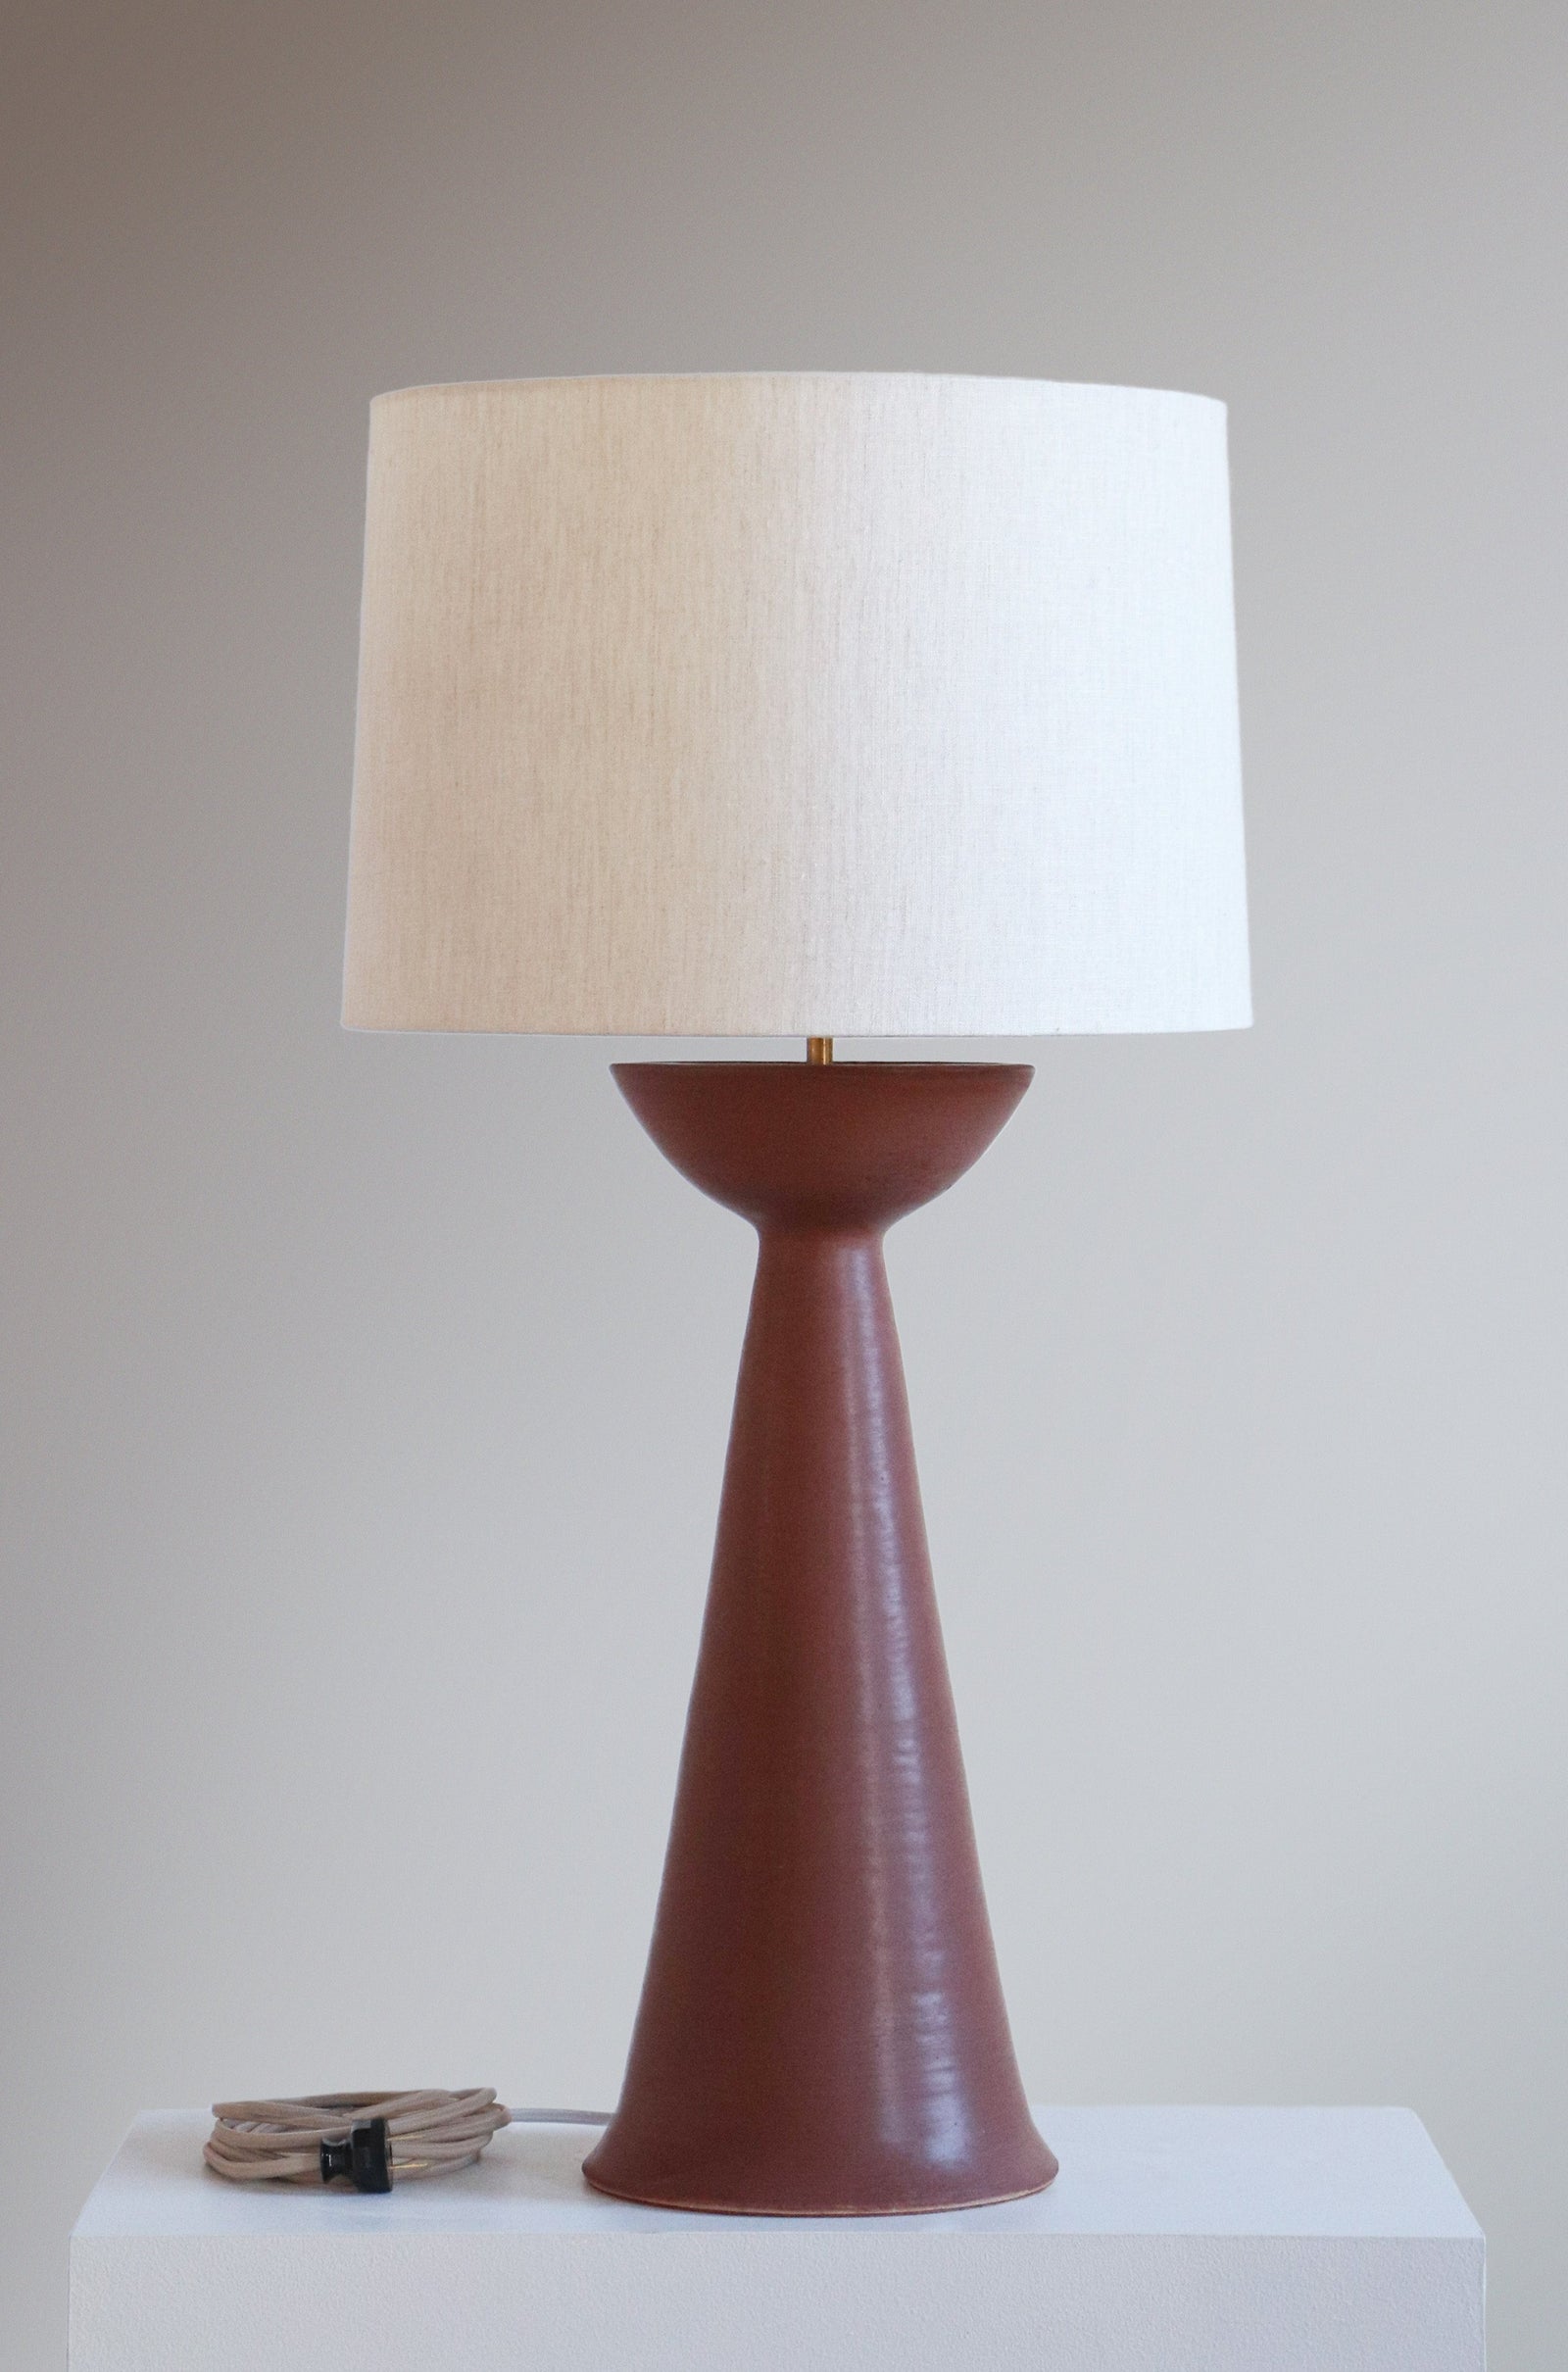 Seneca 30" in Chestnut Finish with oatmeal linen shade